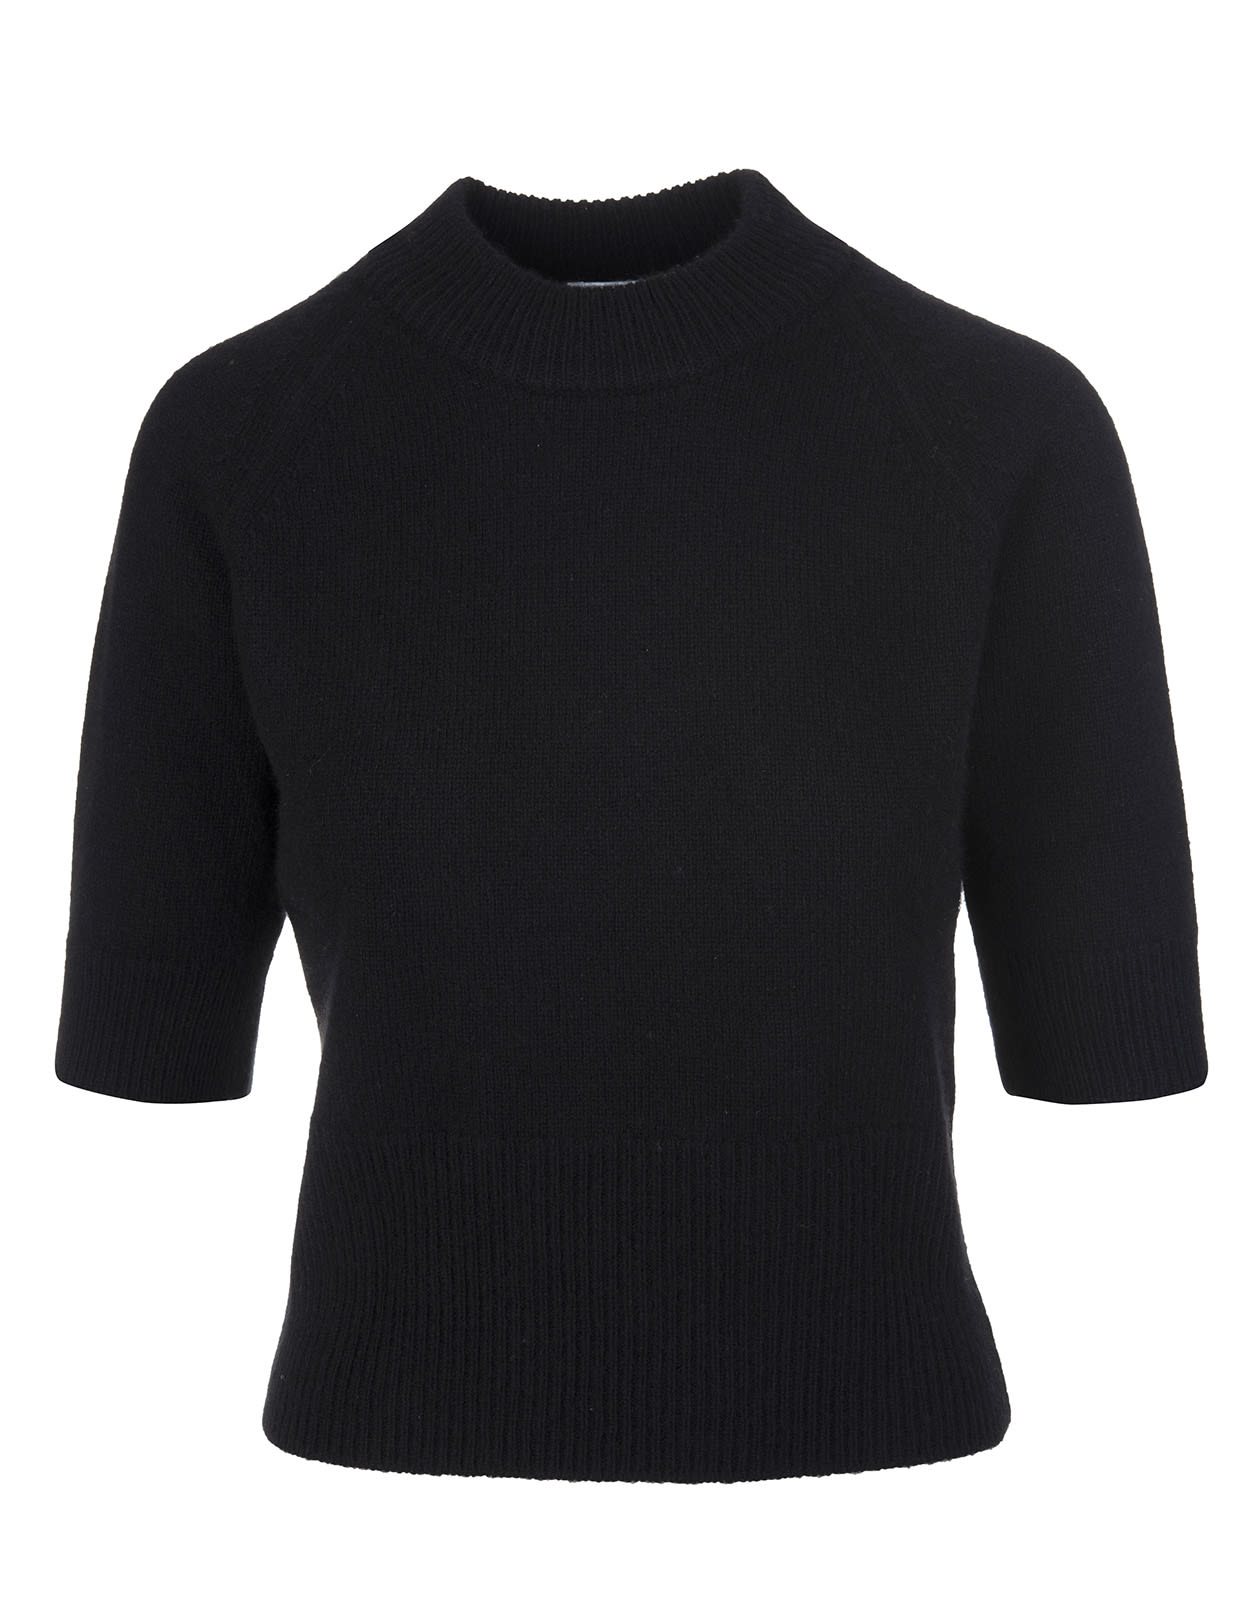 Fedeli Woman Black Cashmere Pullover With Half Sleeves